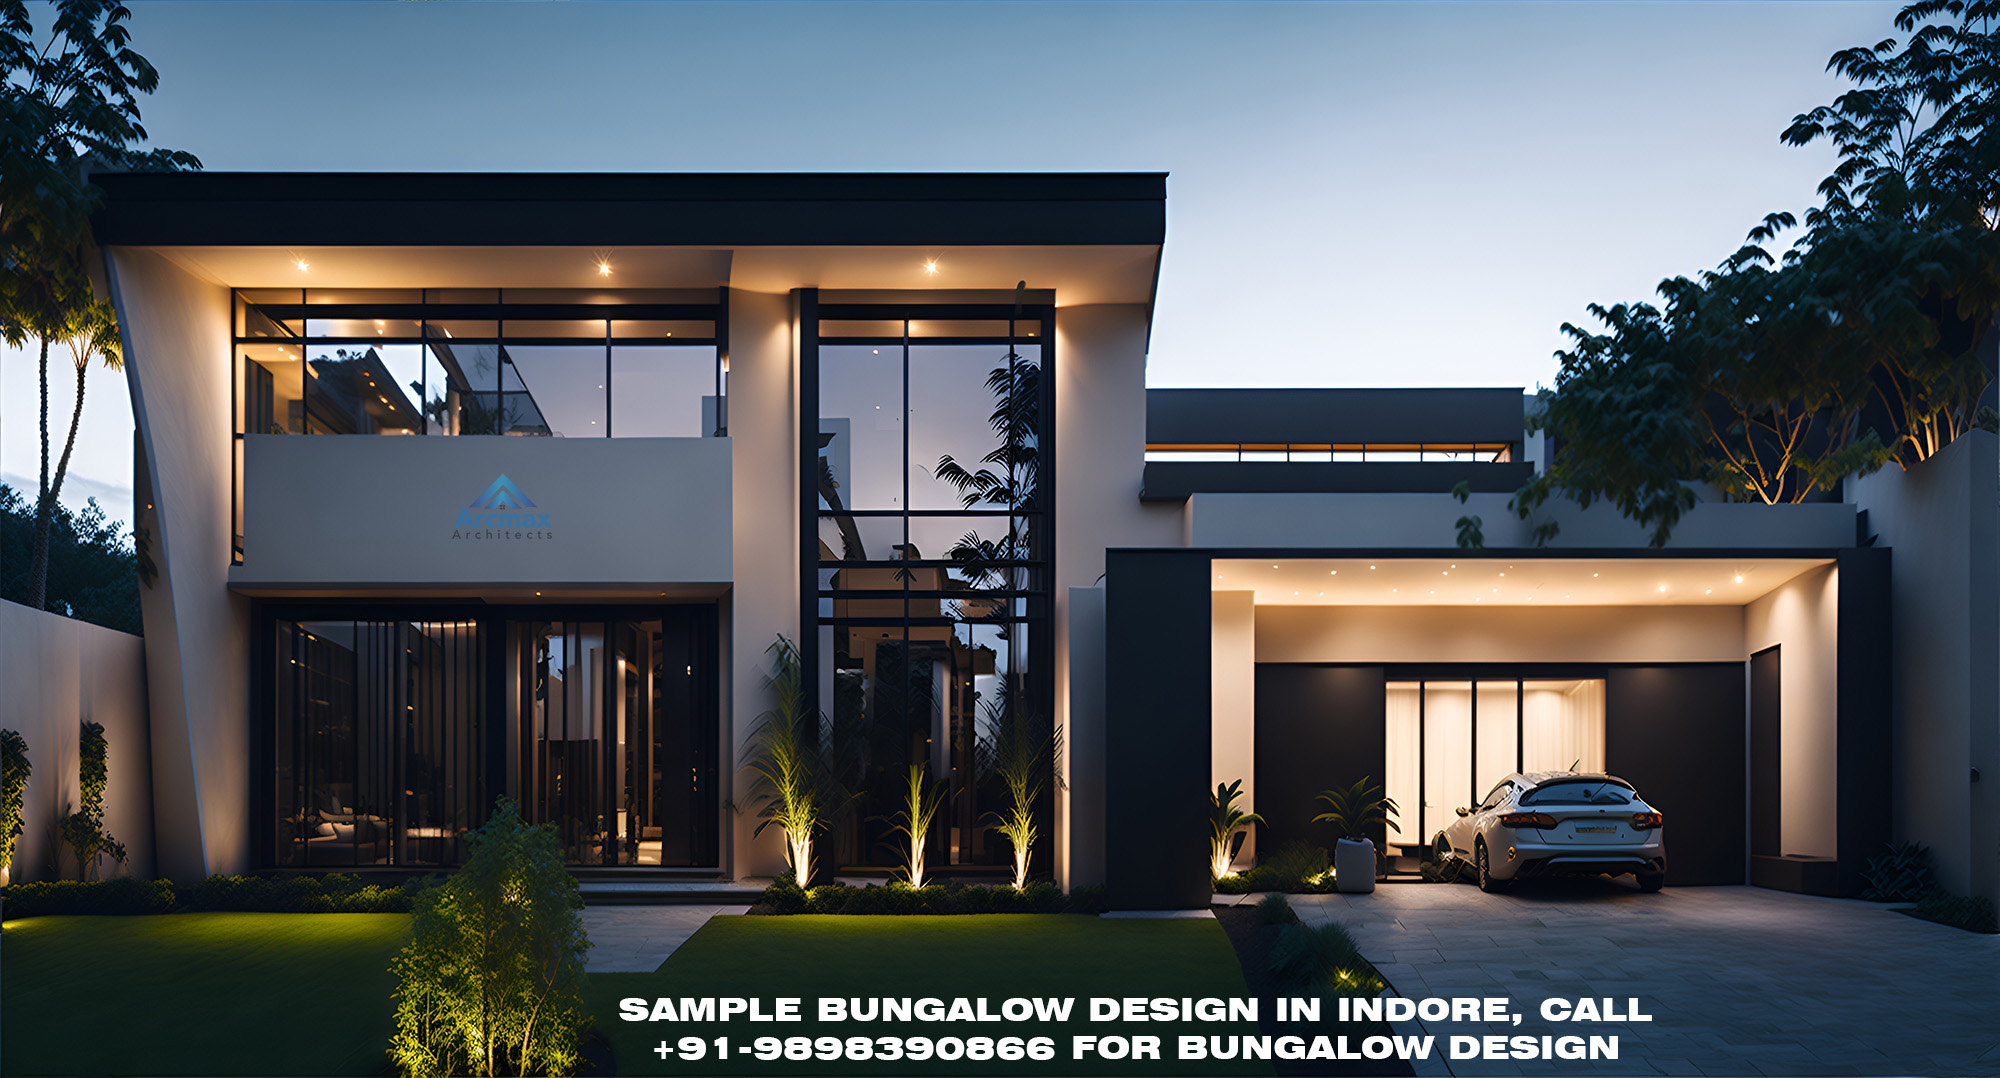 Sample Bungalow Design Architects in Indore India